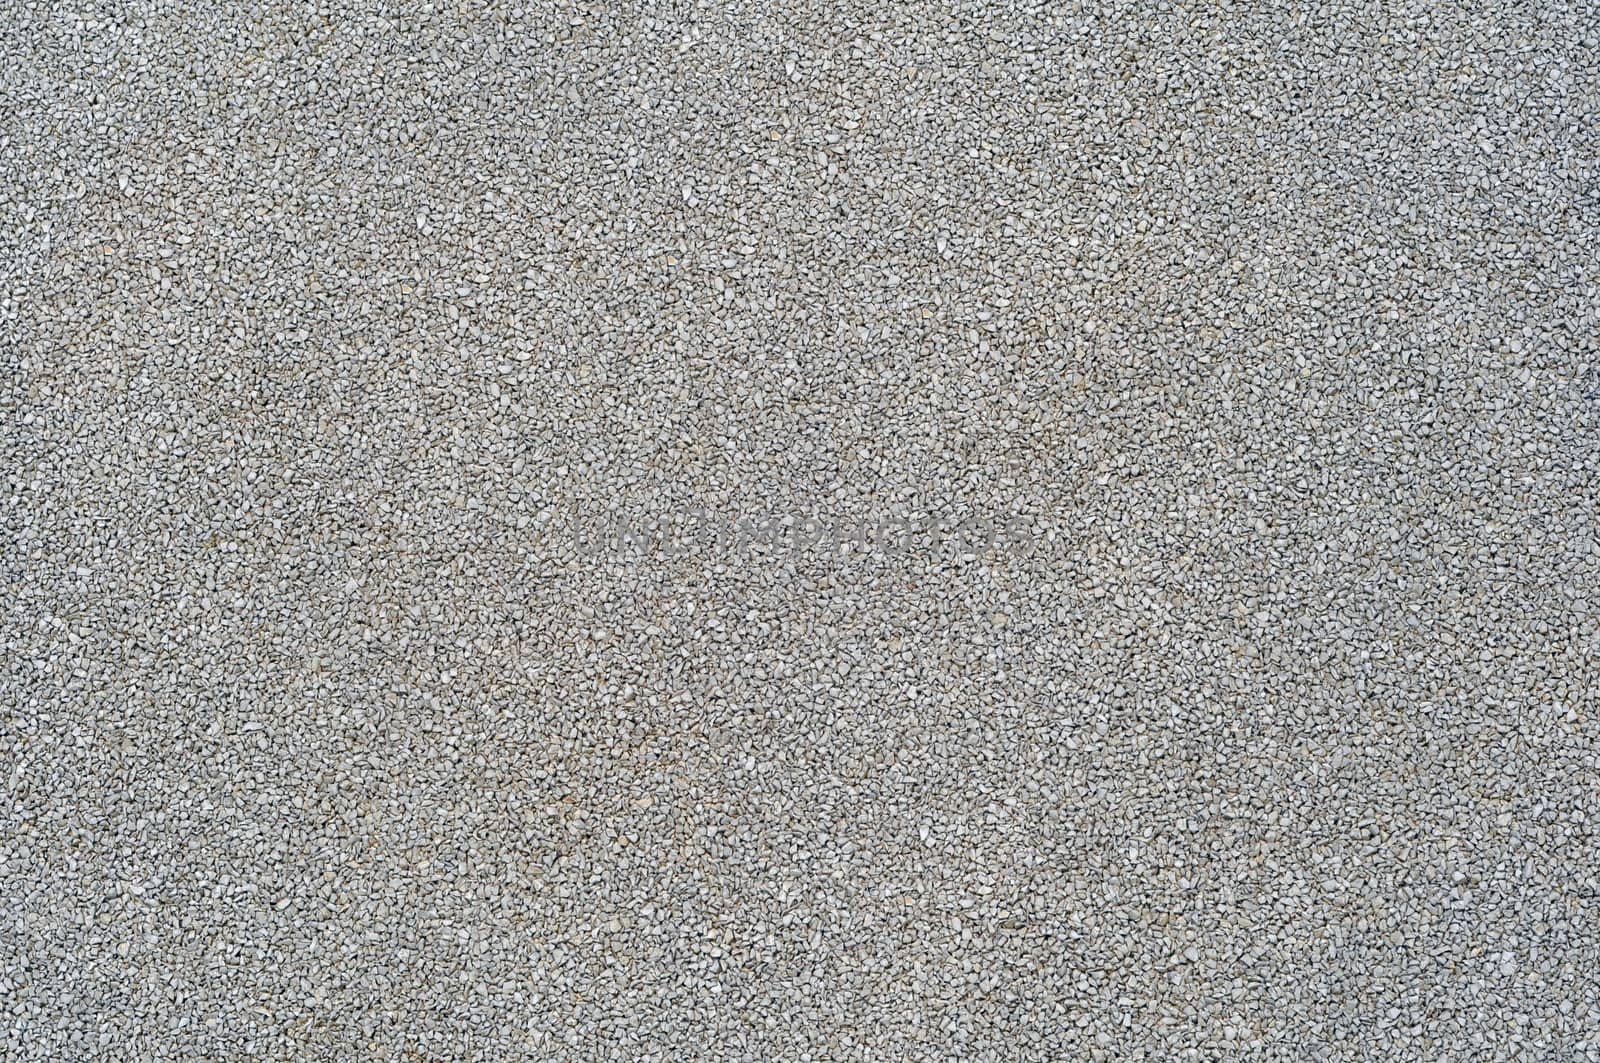 Decorative pavement surfacing made from a stone crumb